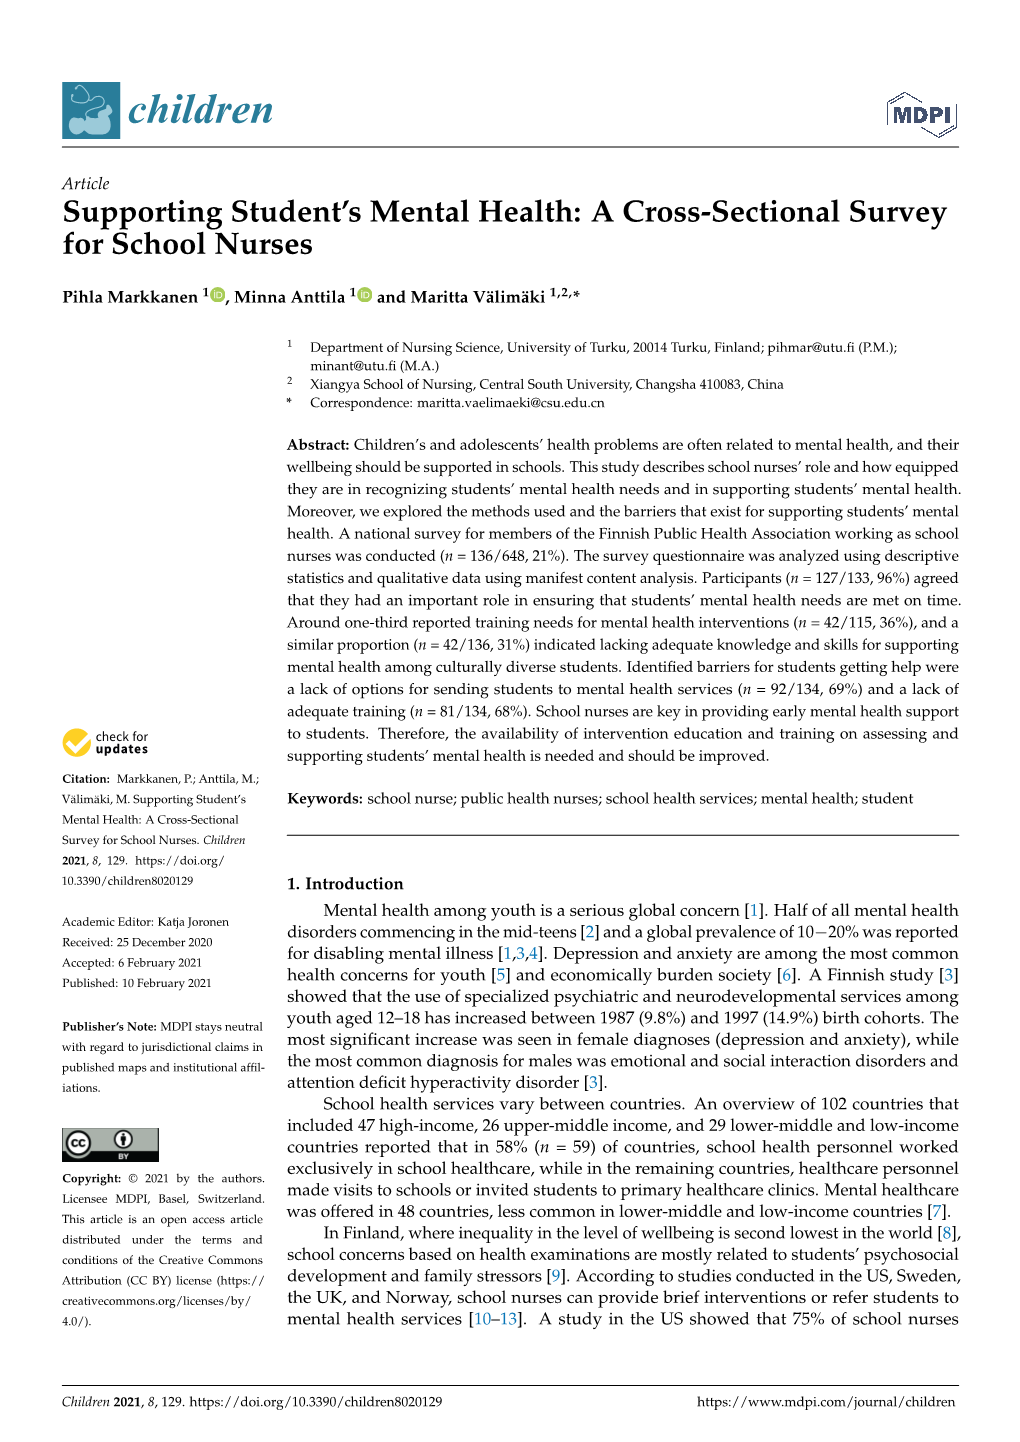 Supporting Student's Mental Health: a Cross-Sectional Survey for School